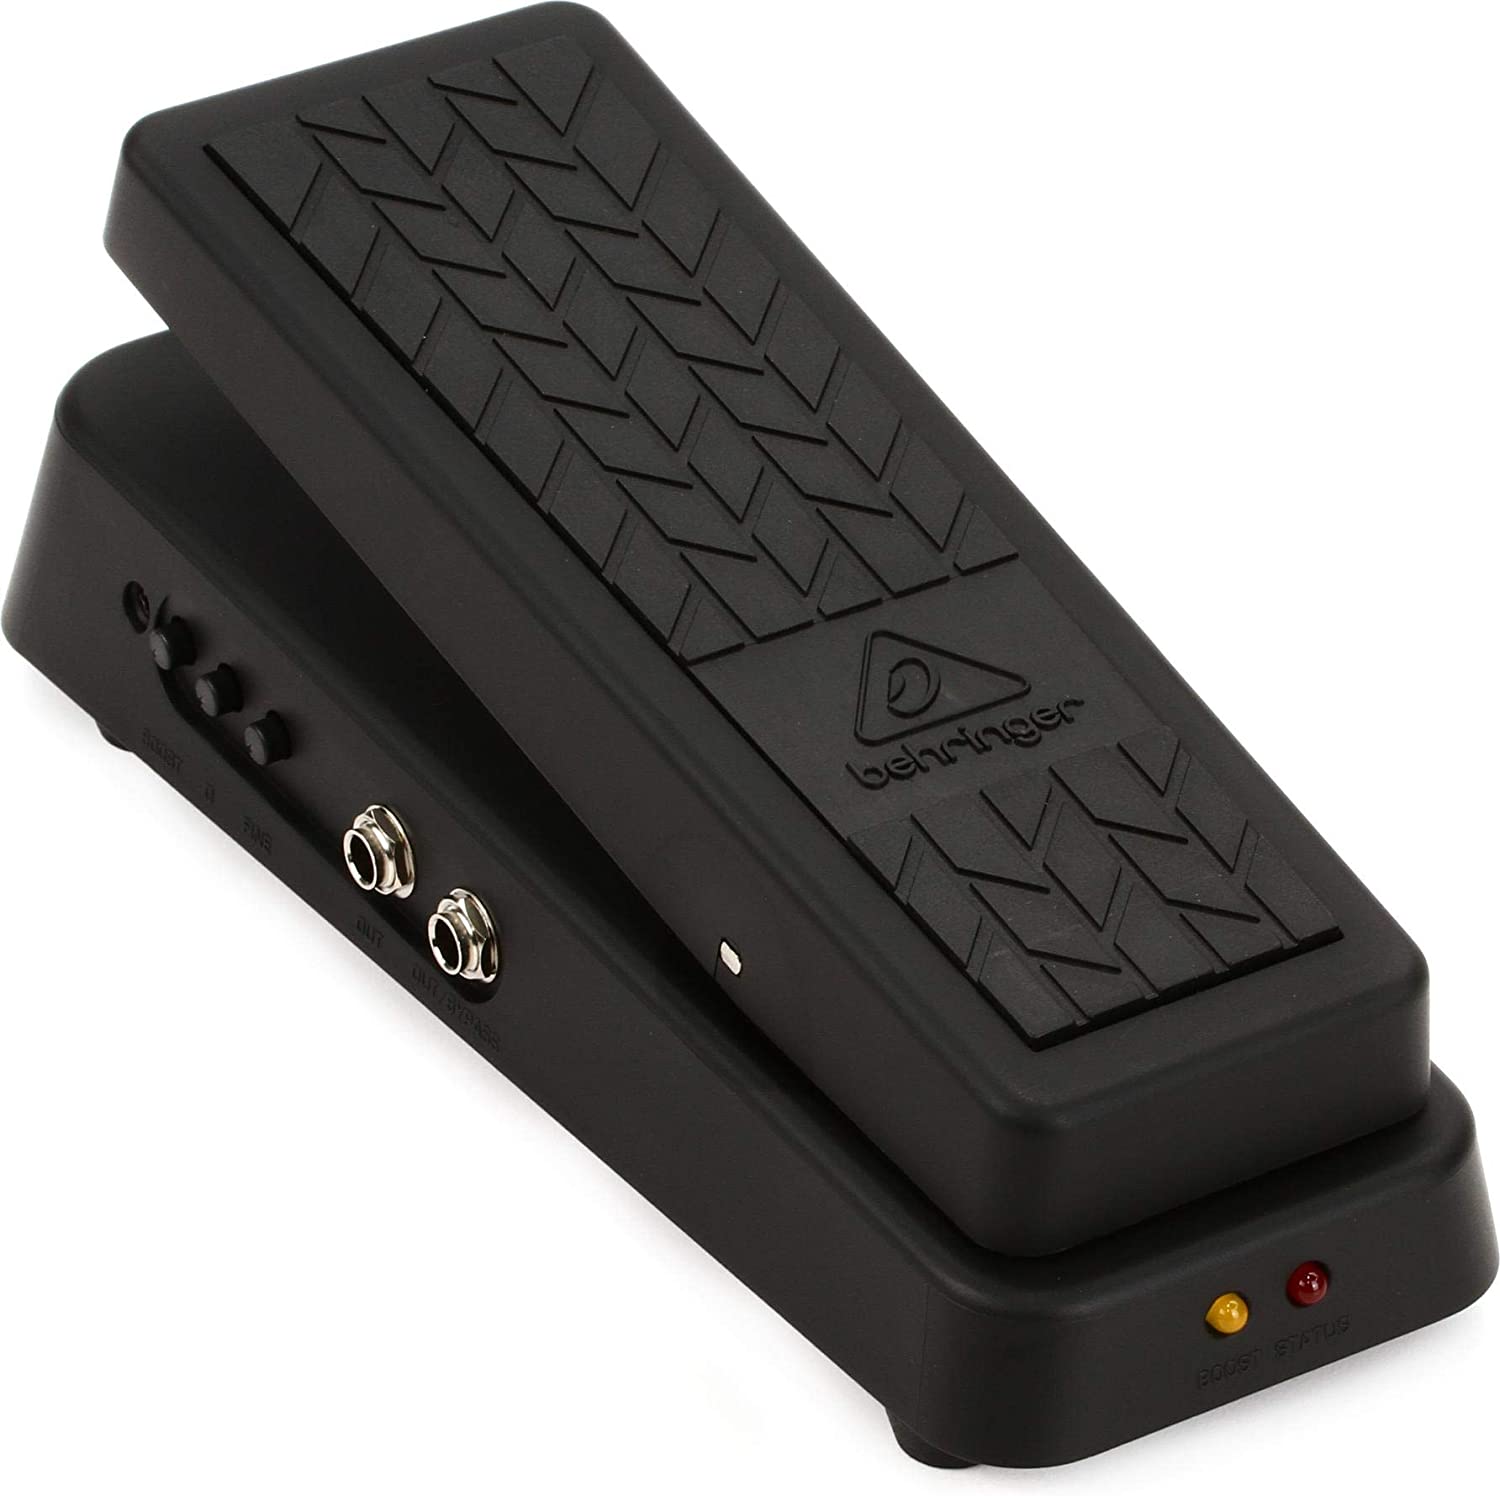 Behringer Hellbabe HB01 Wah-Wah Pedal on a white background